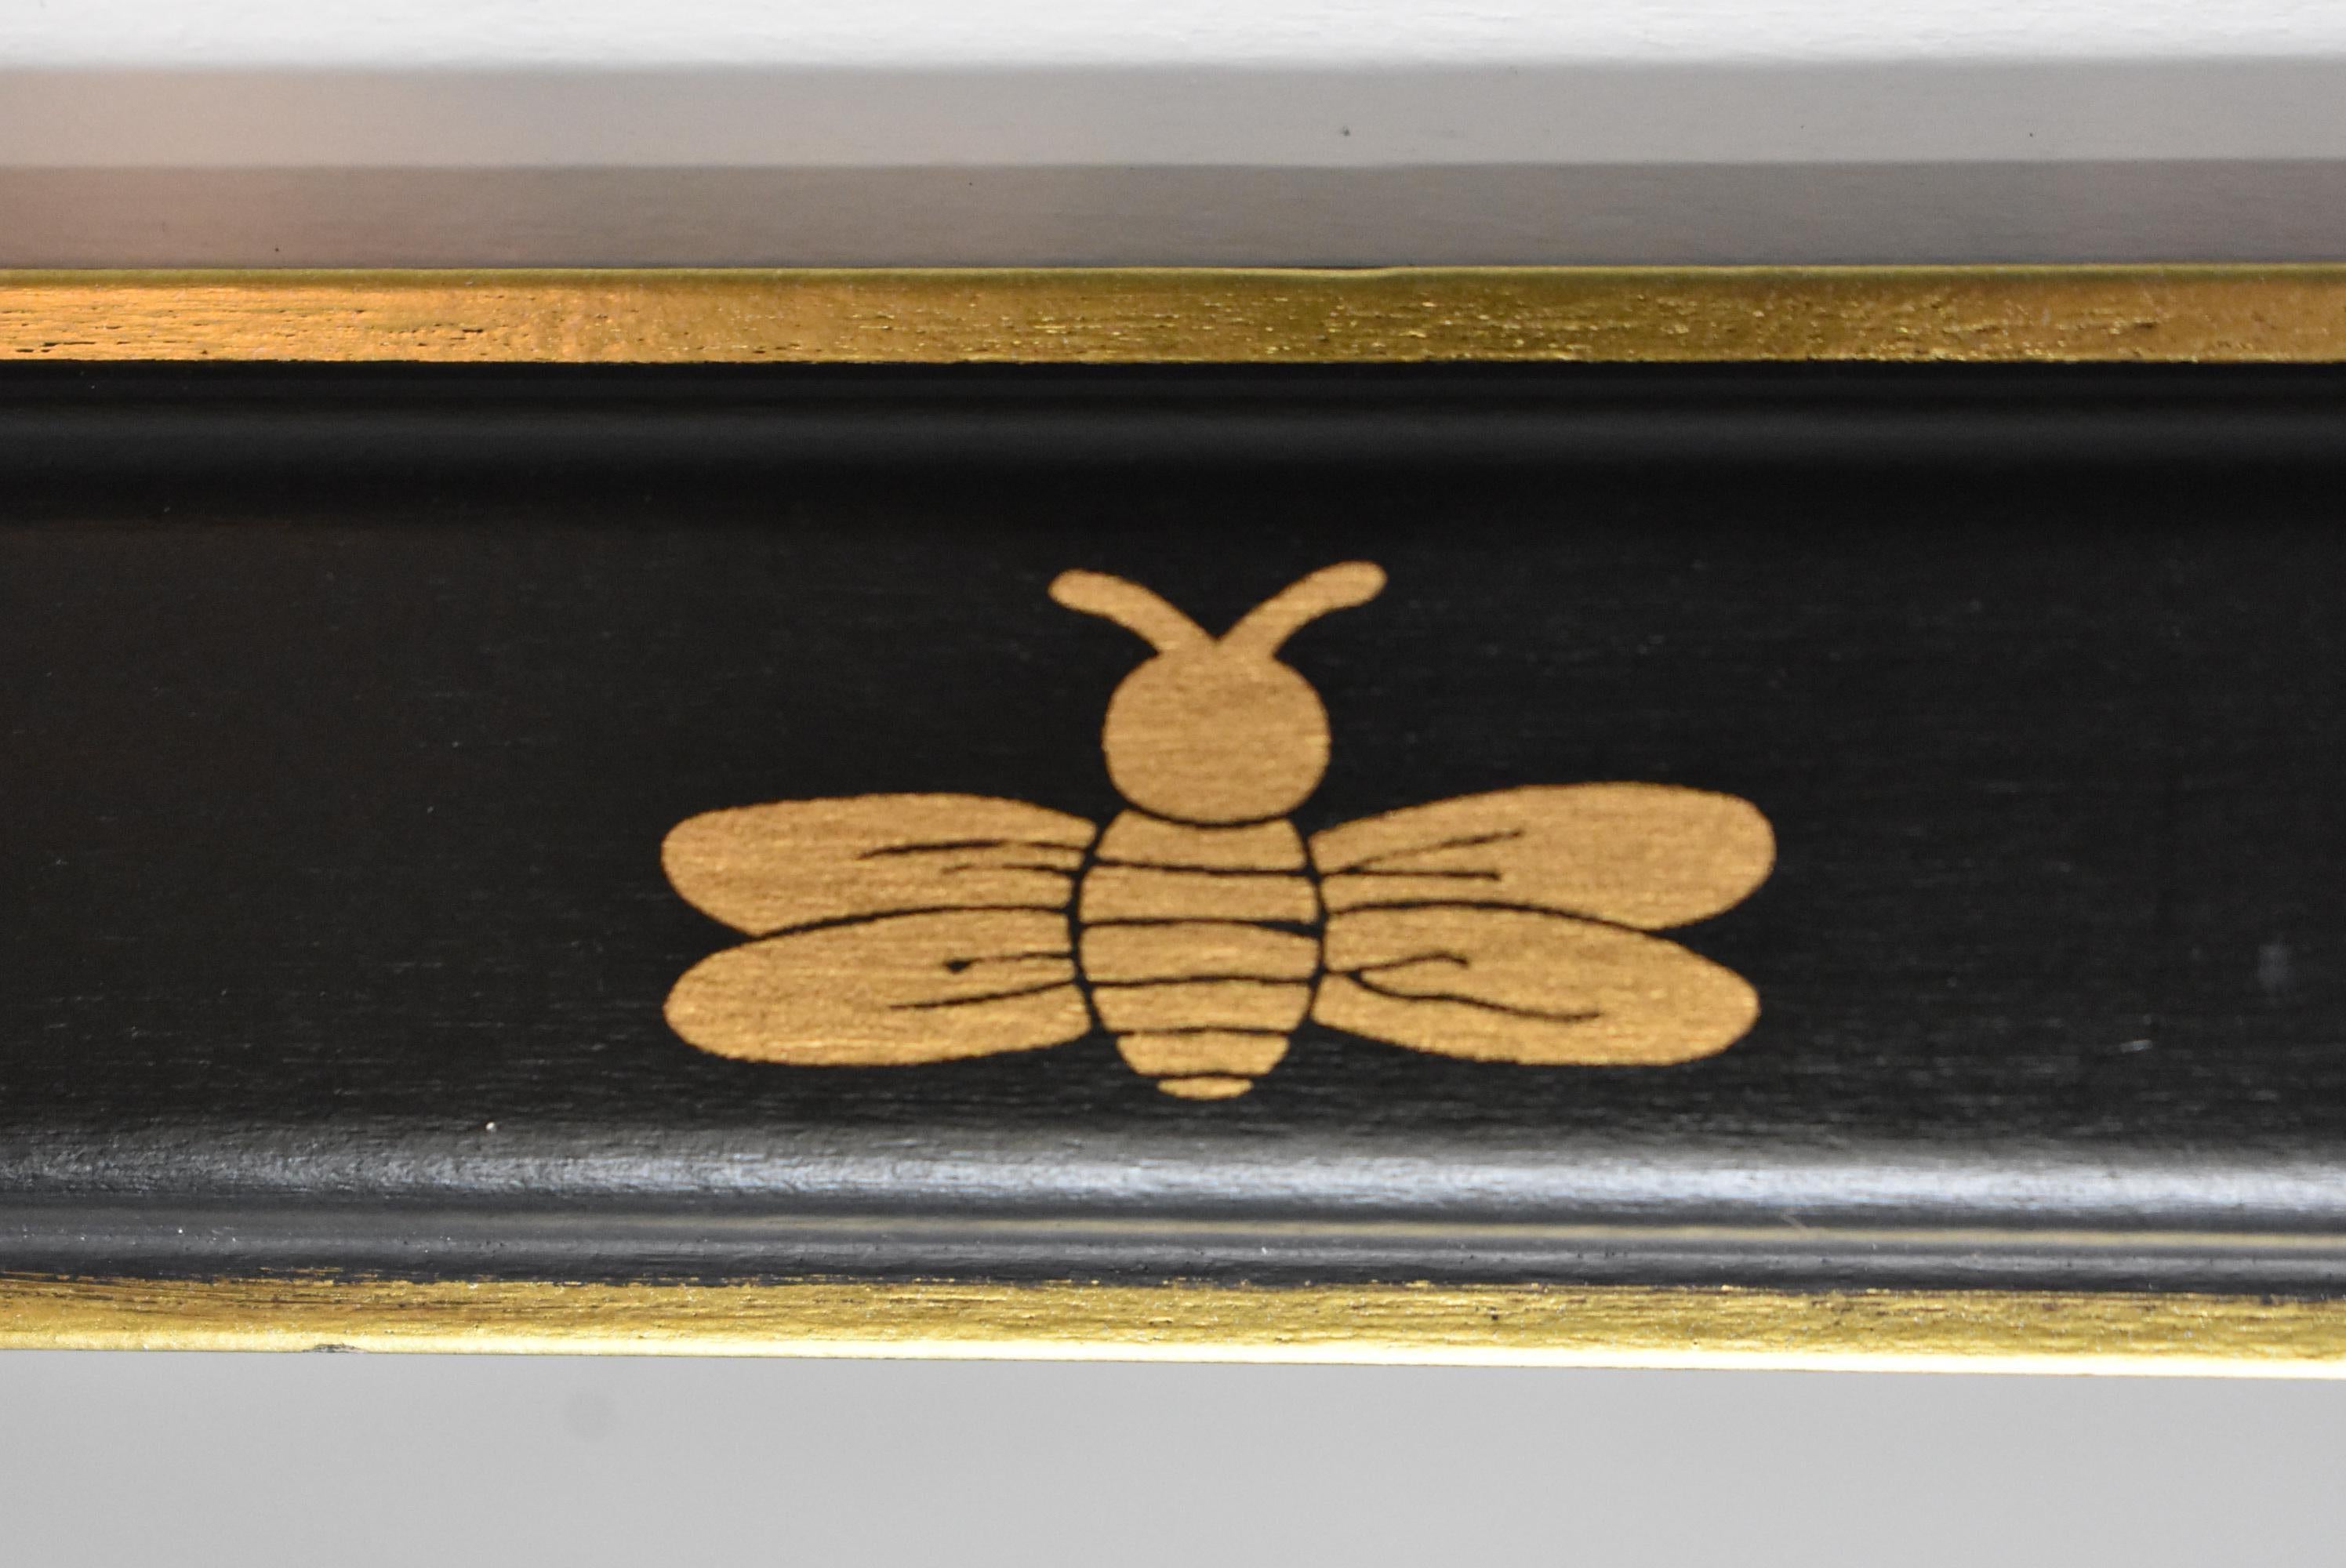 Hand painted gold on black bumblebee frame. December Tulip A by Chelsea House.